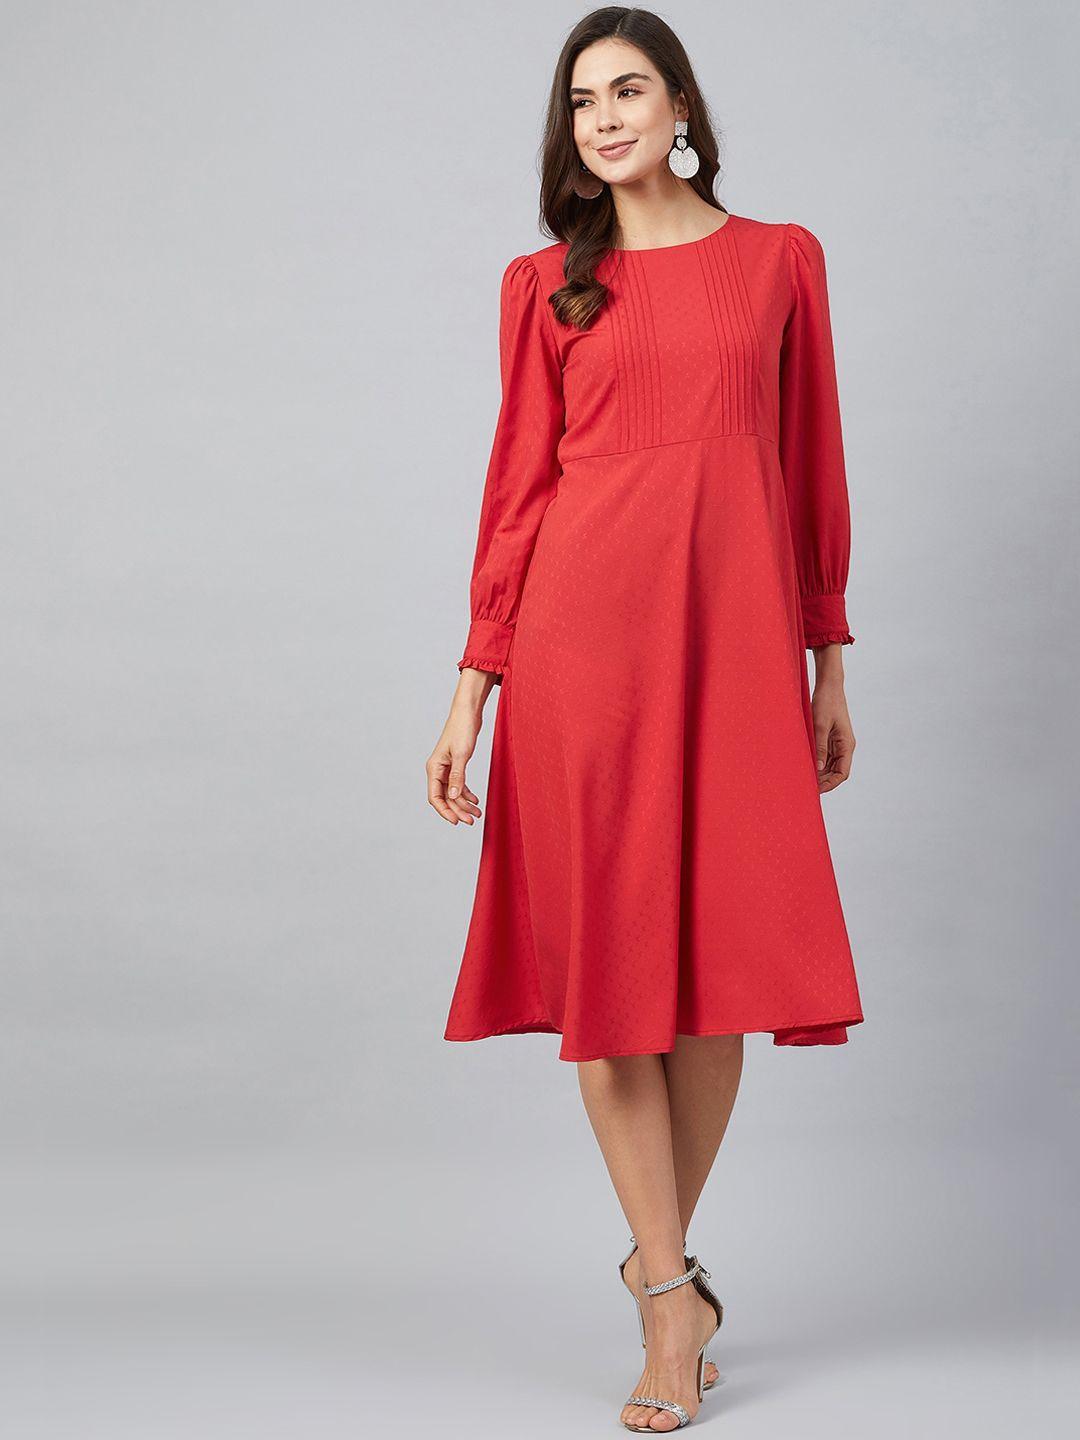 marie claire women red self design fit and flare dress